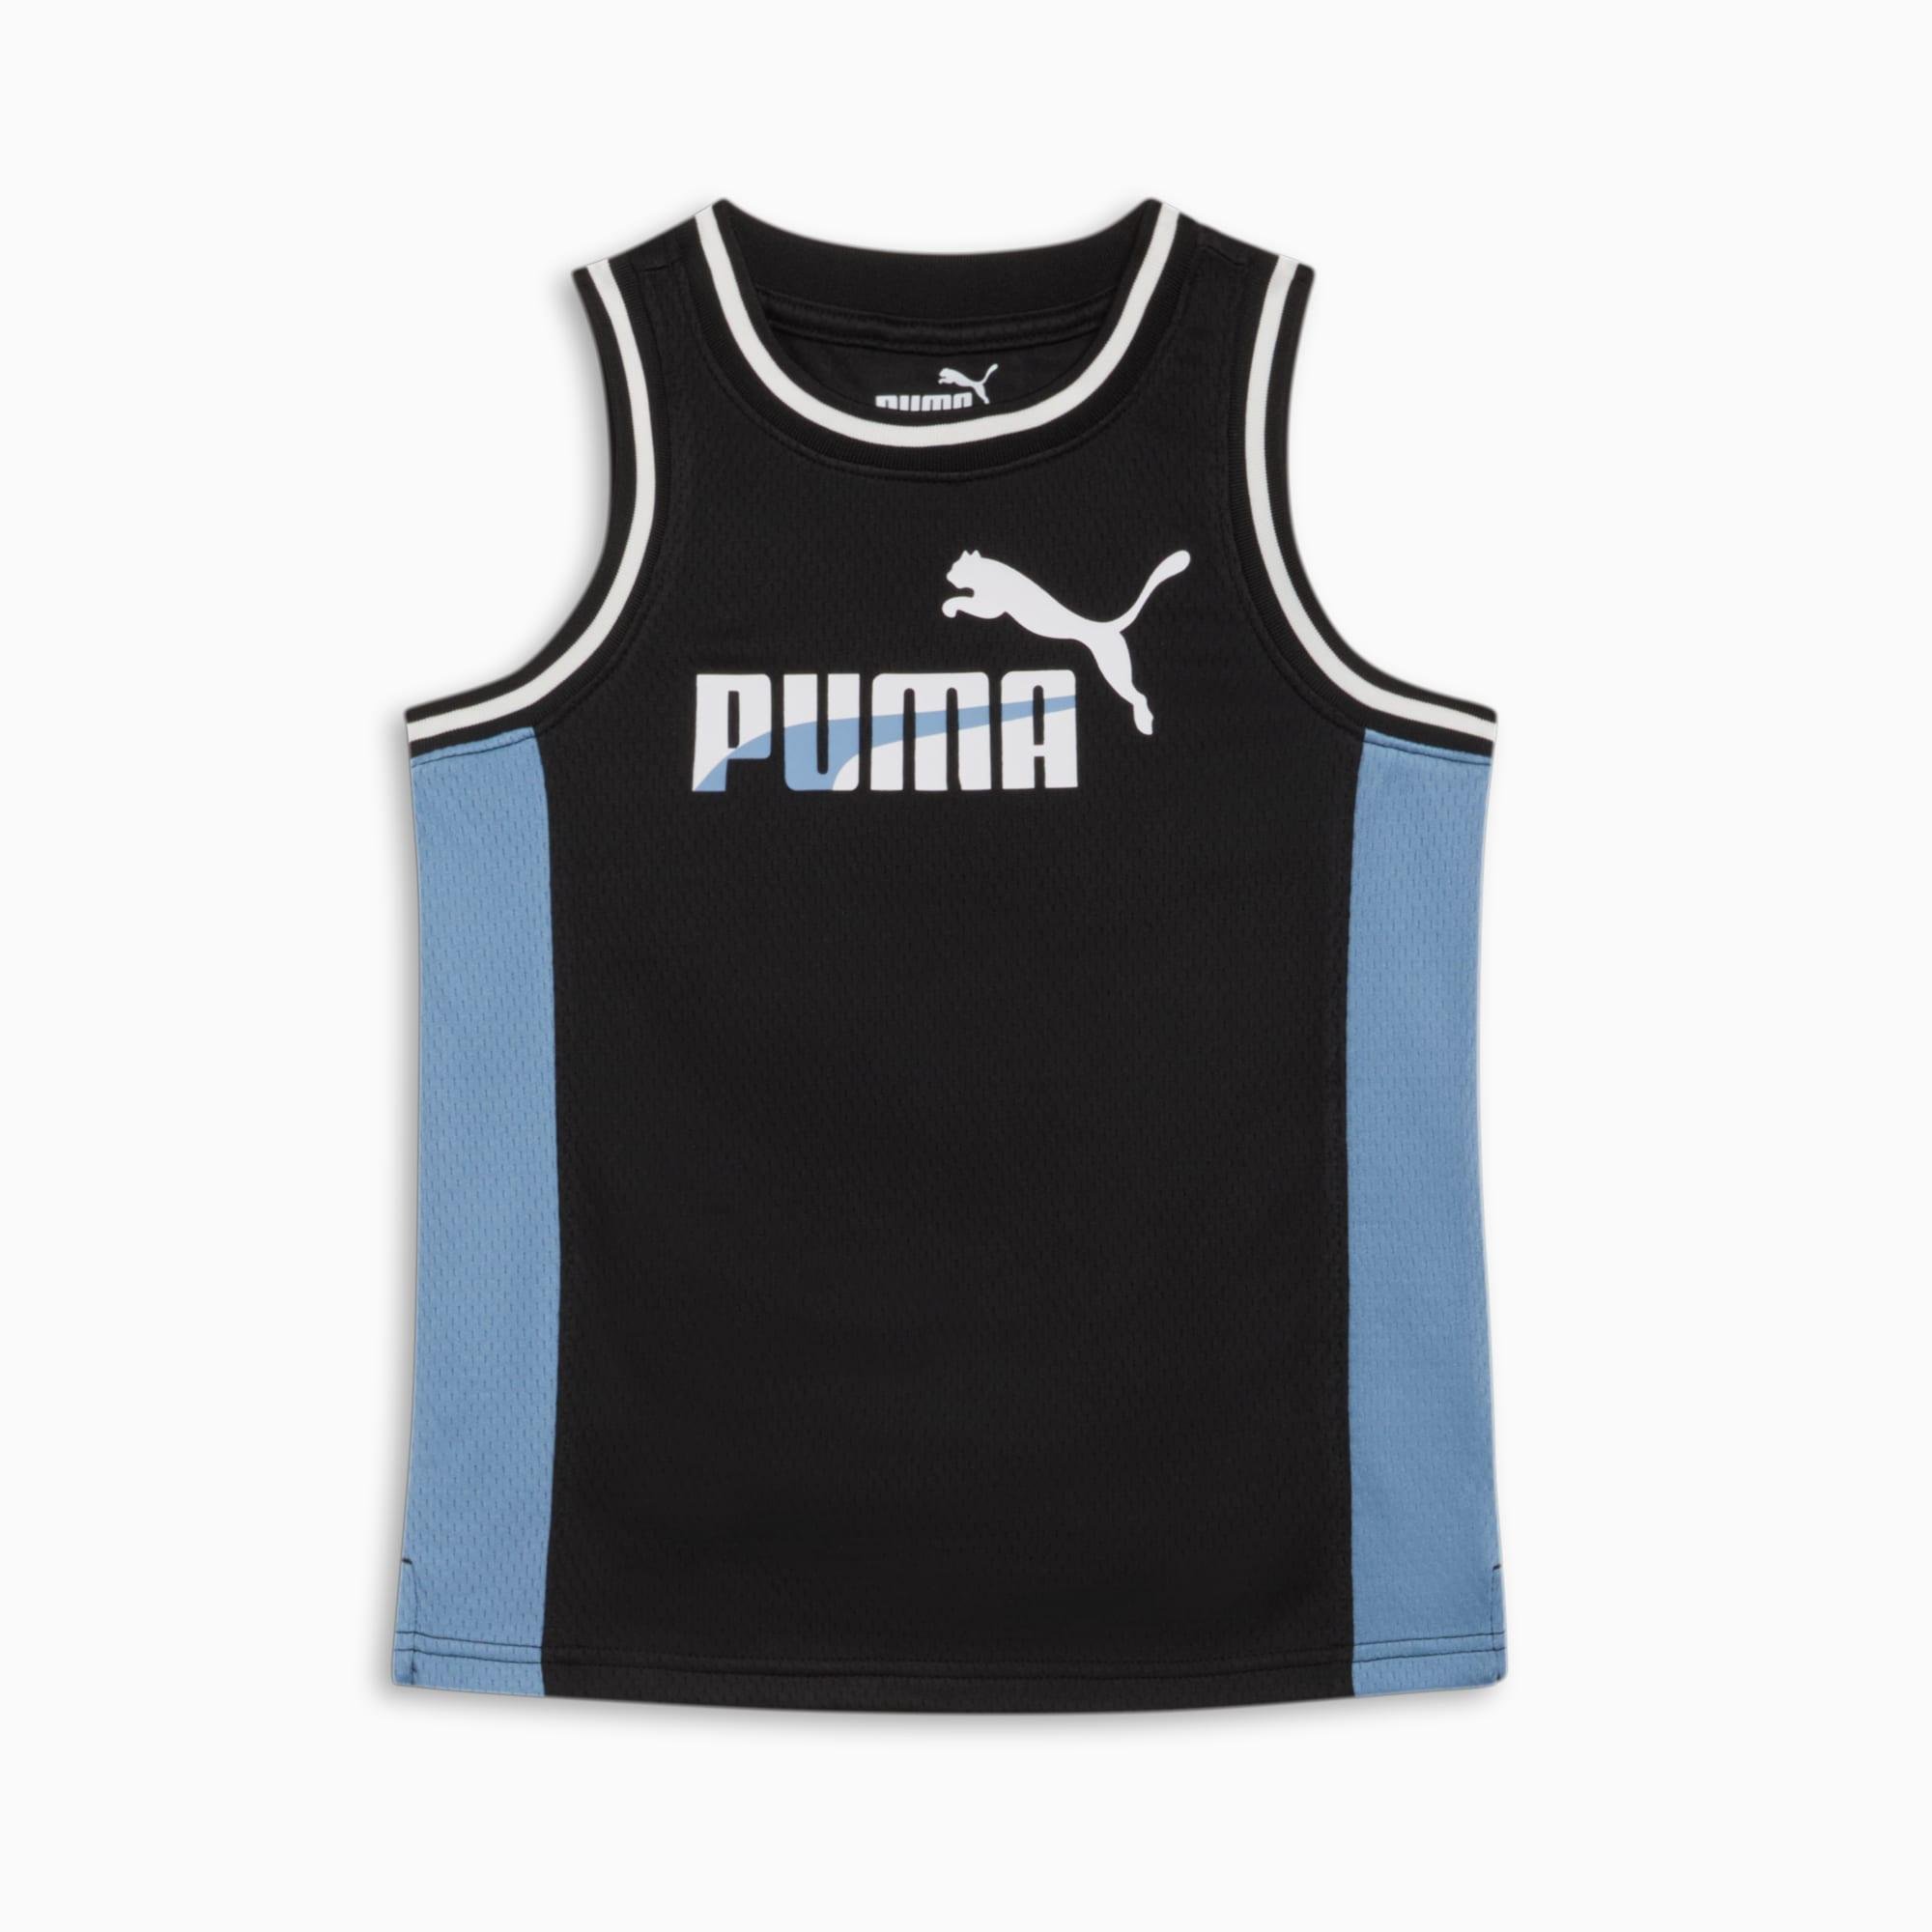 One More Game Little Kids' Basketball Tank by PUMA